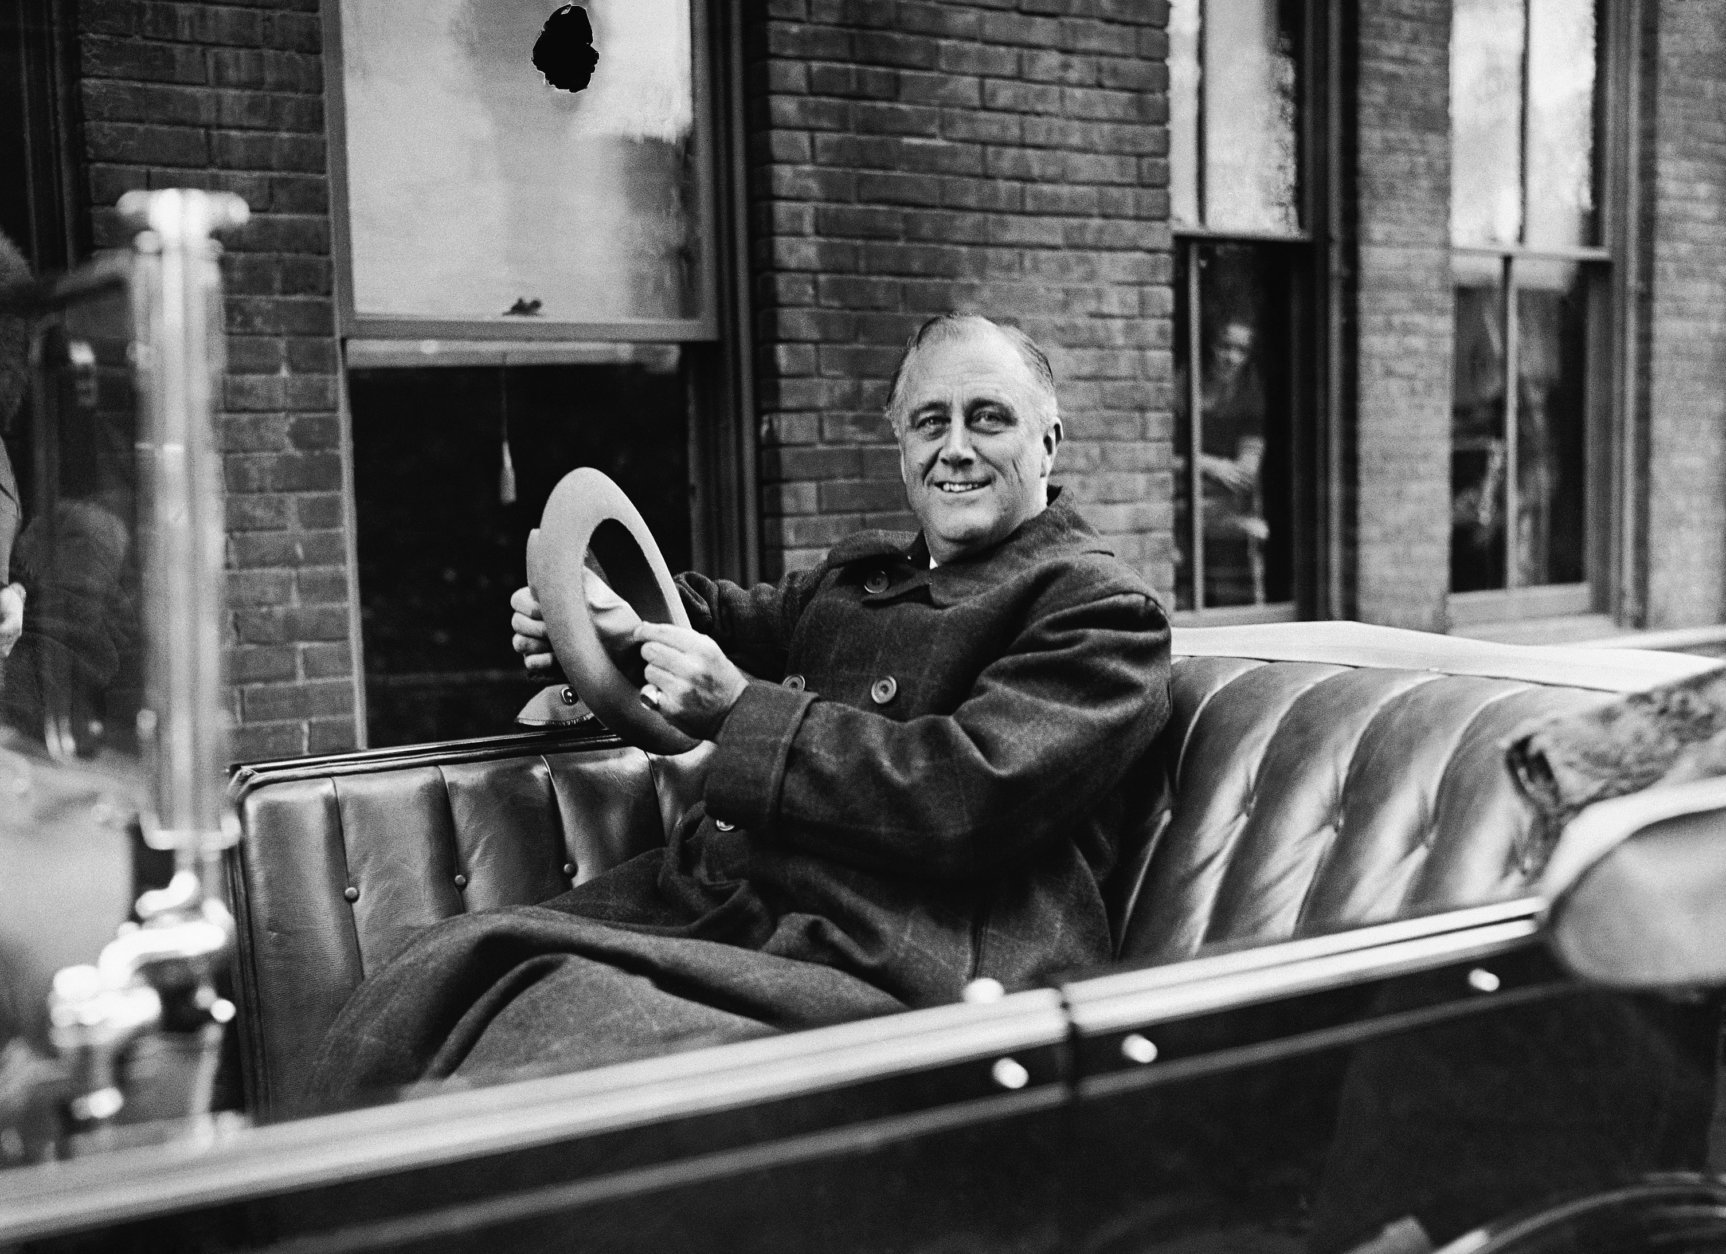 ** FILE ** In this Oct. 29, 1932 file photo, Gov. Franklin D. Roosevelt of New York is shown in his car in Albany as he starts out for his campaign speaking tour.   The "mirage" of American economic invulnerability has vanished, along with "much of the savings of thrifty and prudent men and women," the presidential hopeful told the crowd. Franklin Roosevelt's words in 1932 are oddly prescient for today's crisis. (AP Photo)